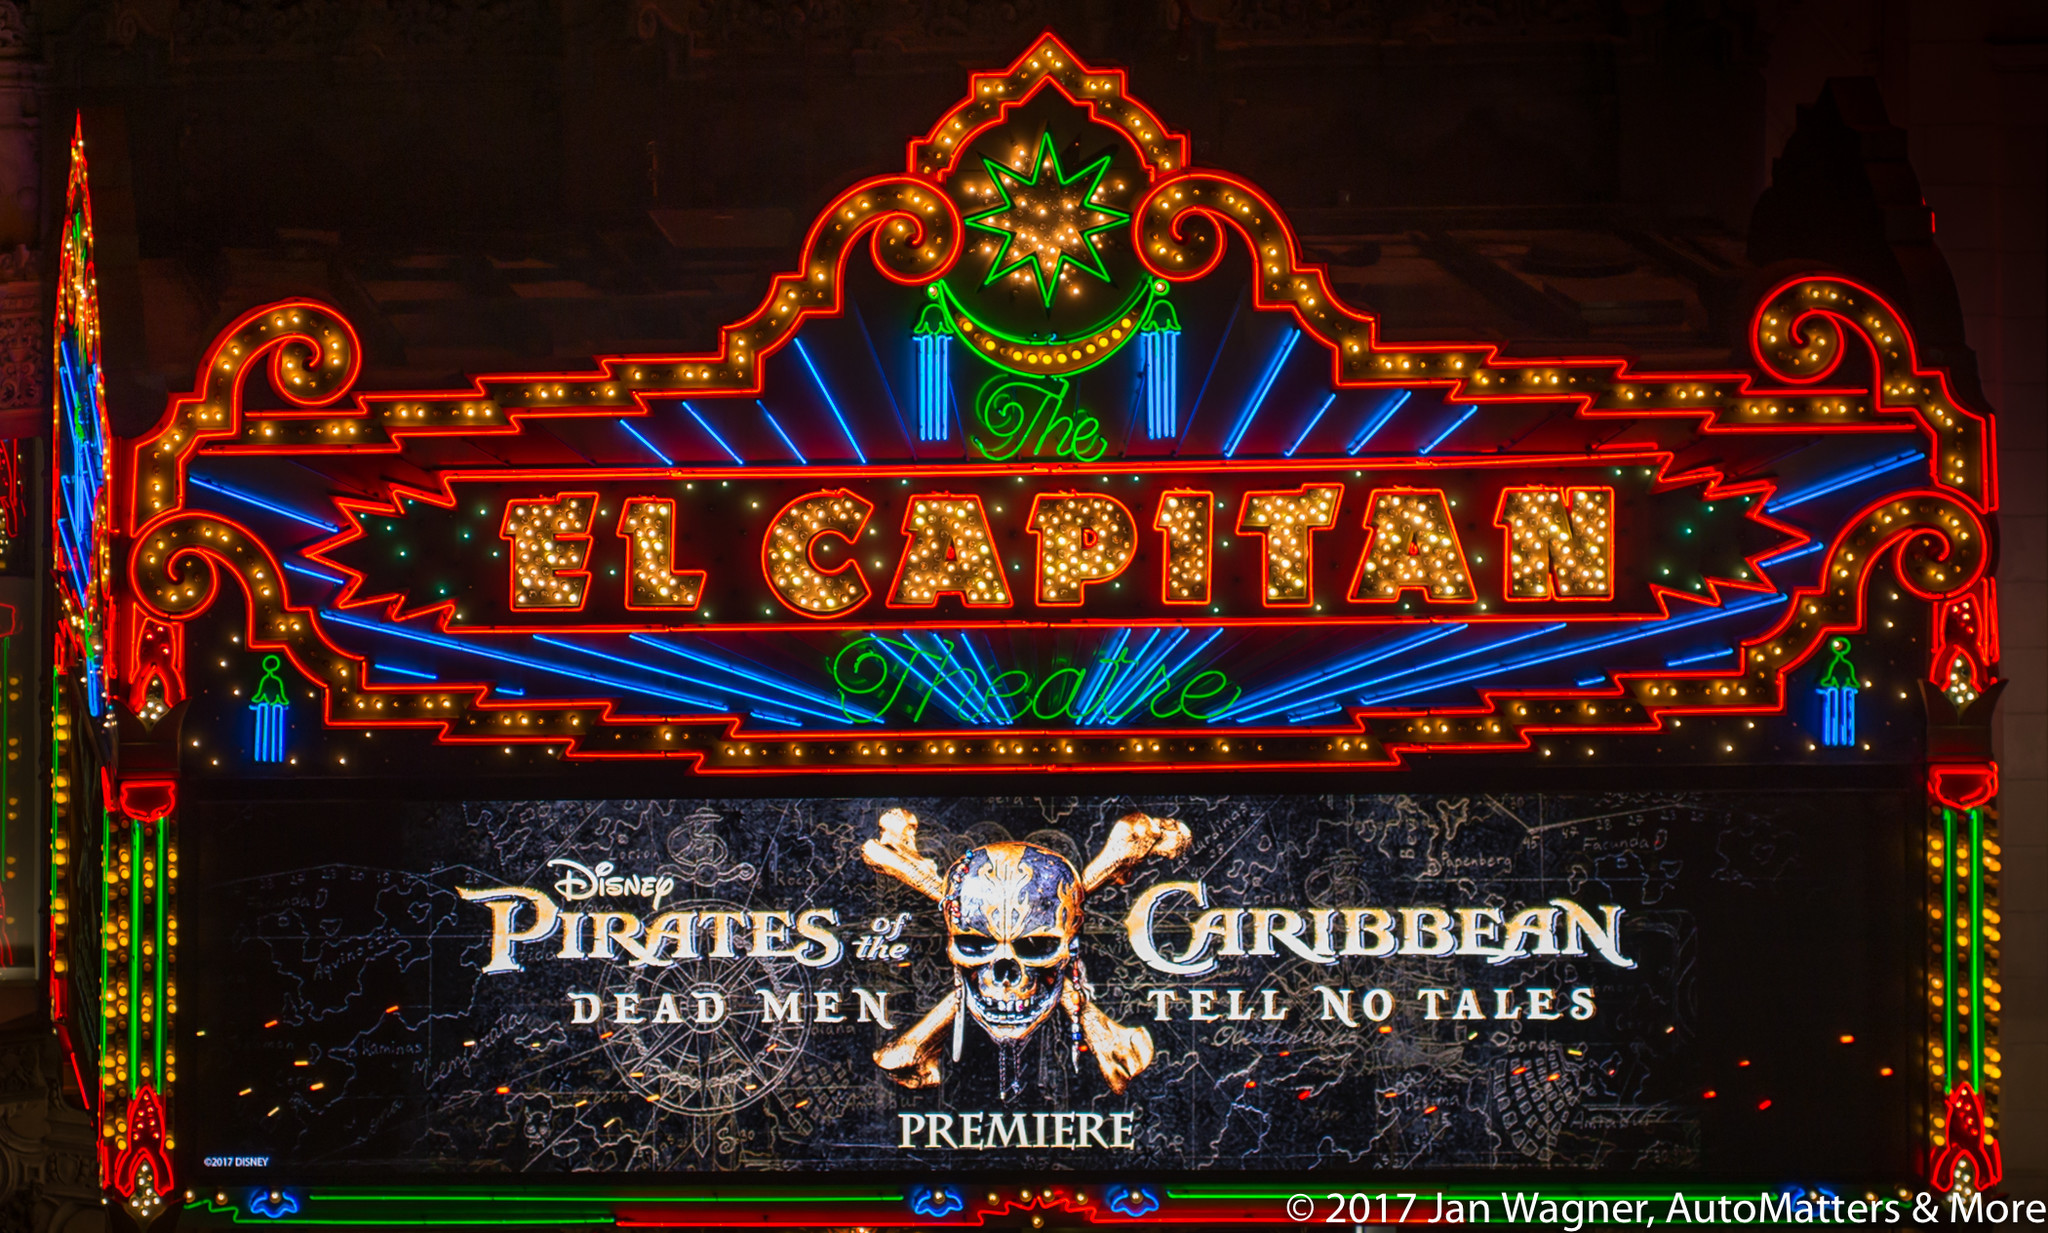 Marquee of the El Capitan Theater in Hollywood